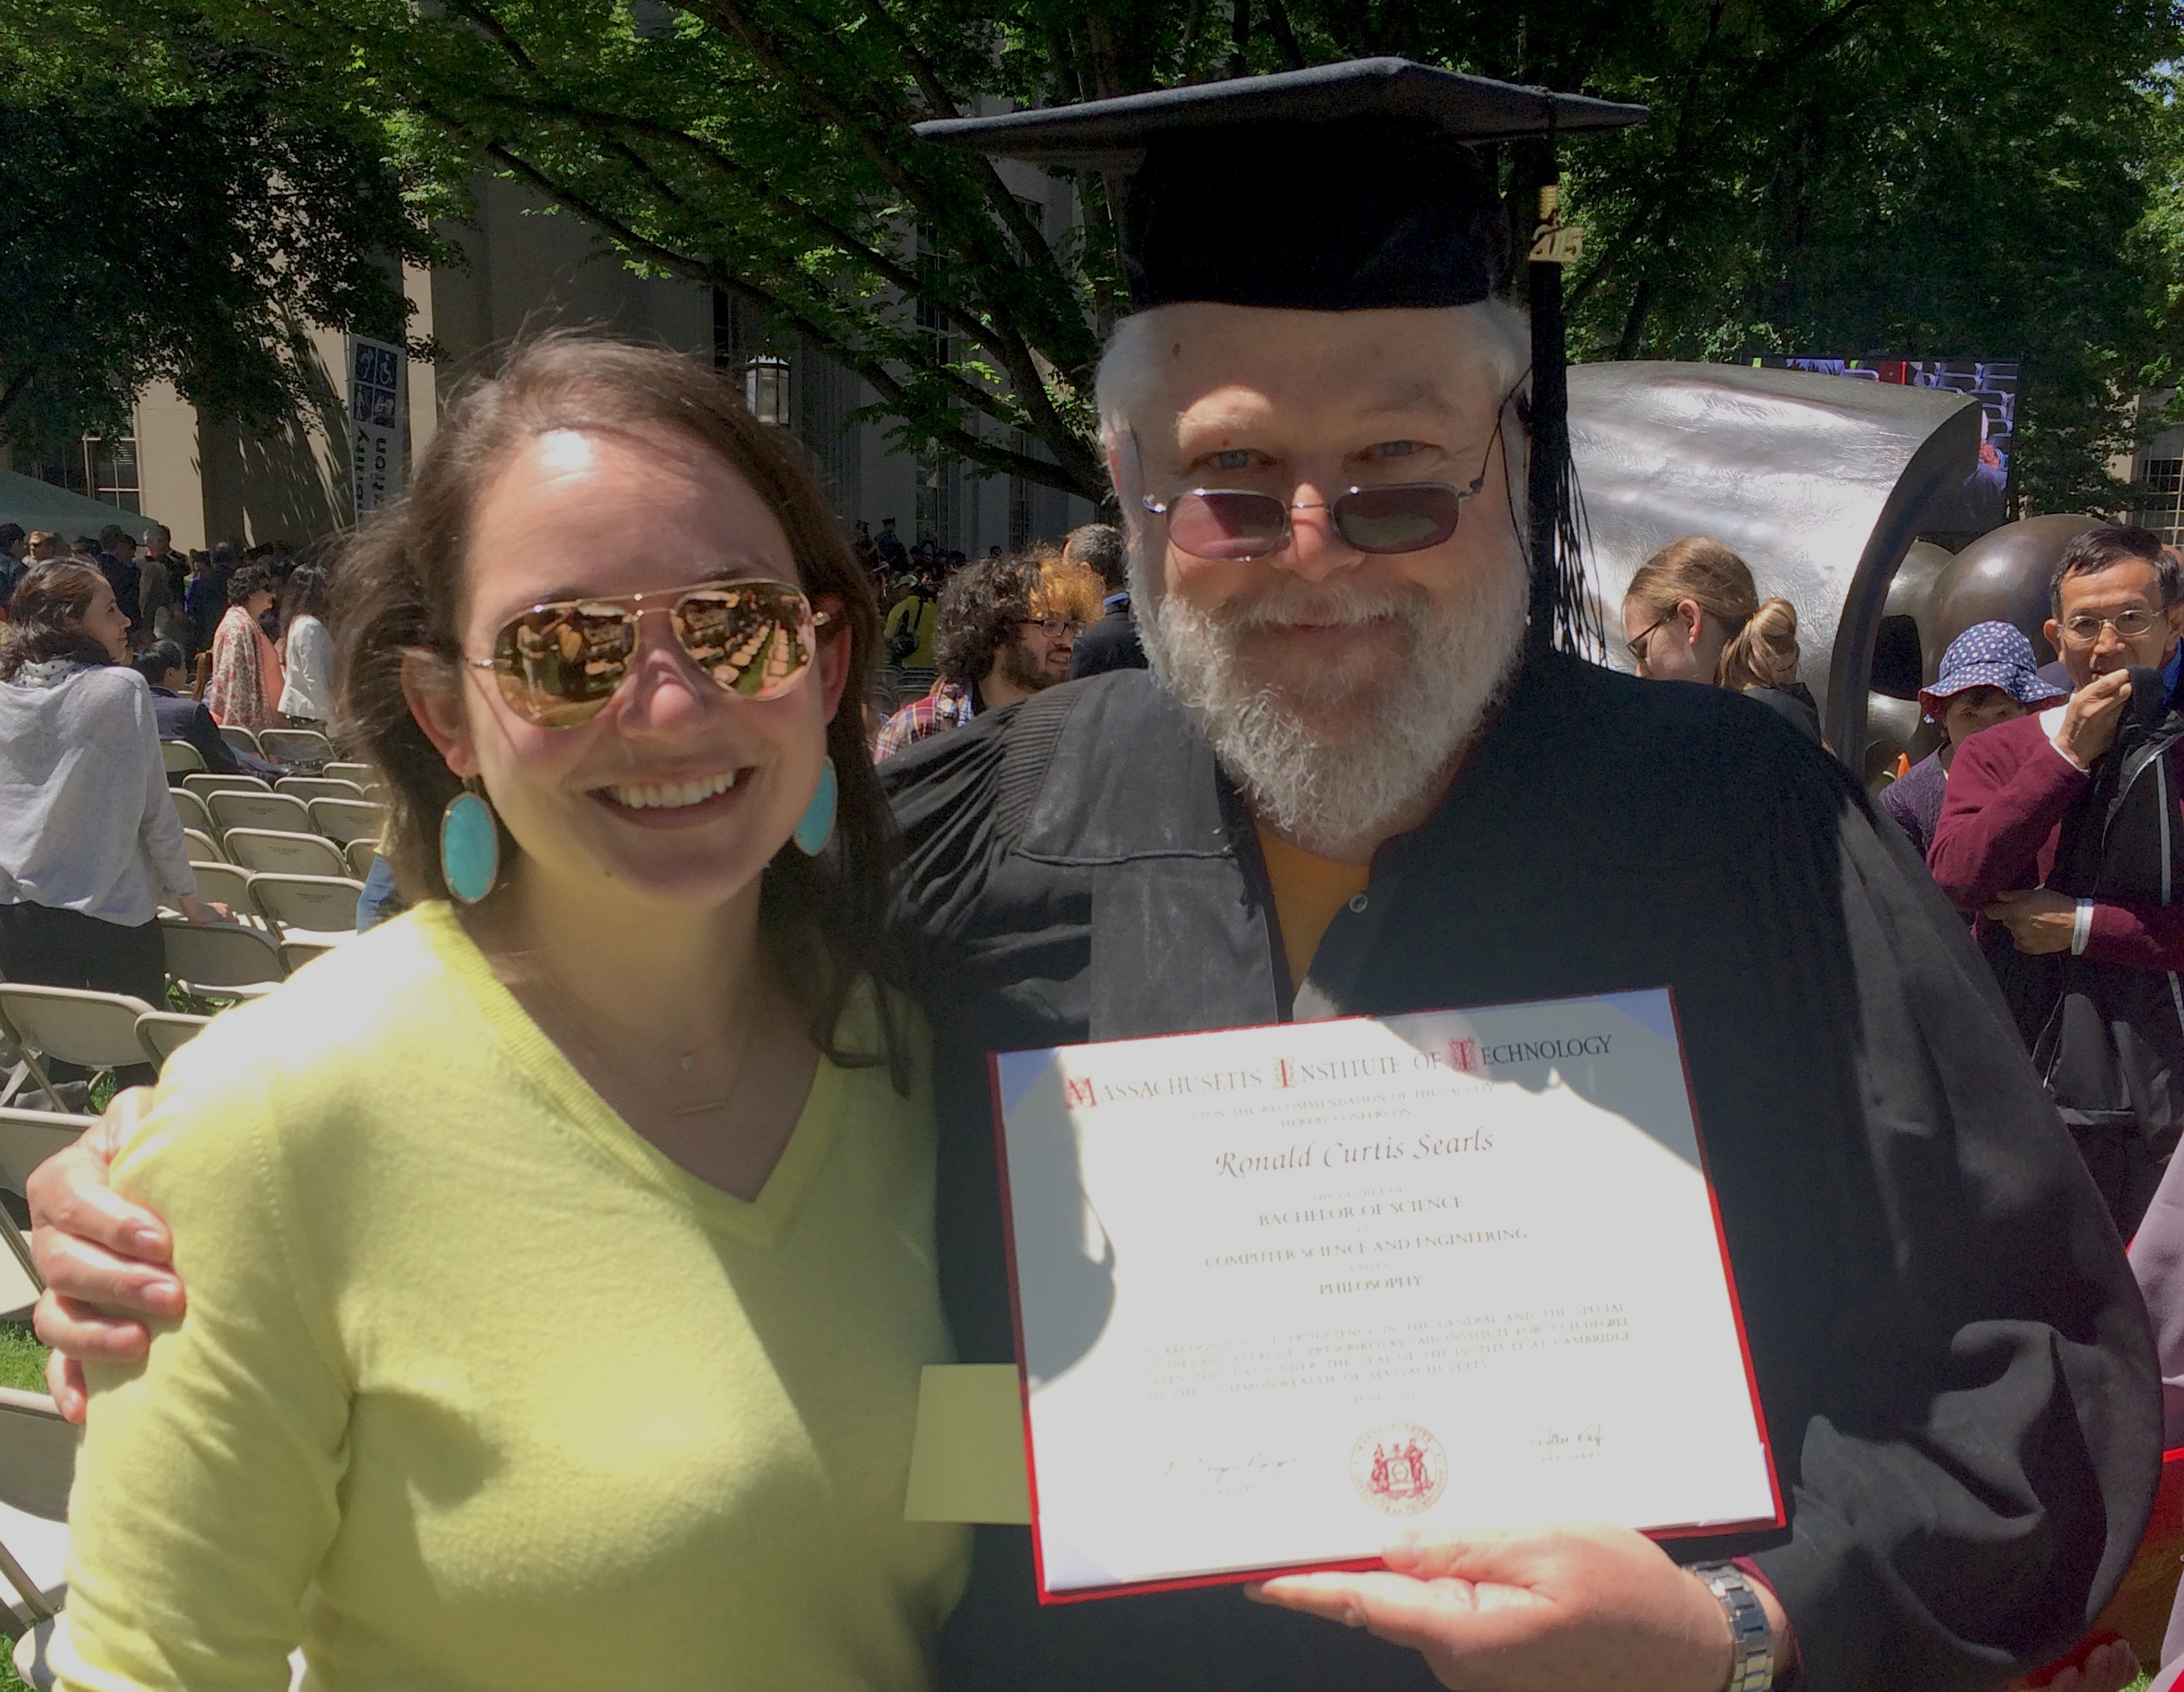 Man graduating from MIT with his daugher